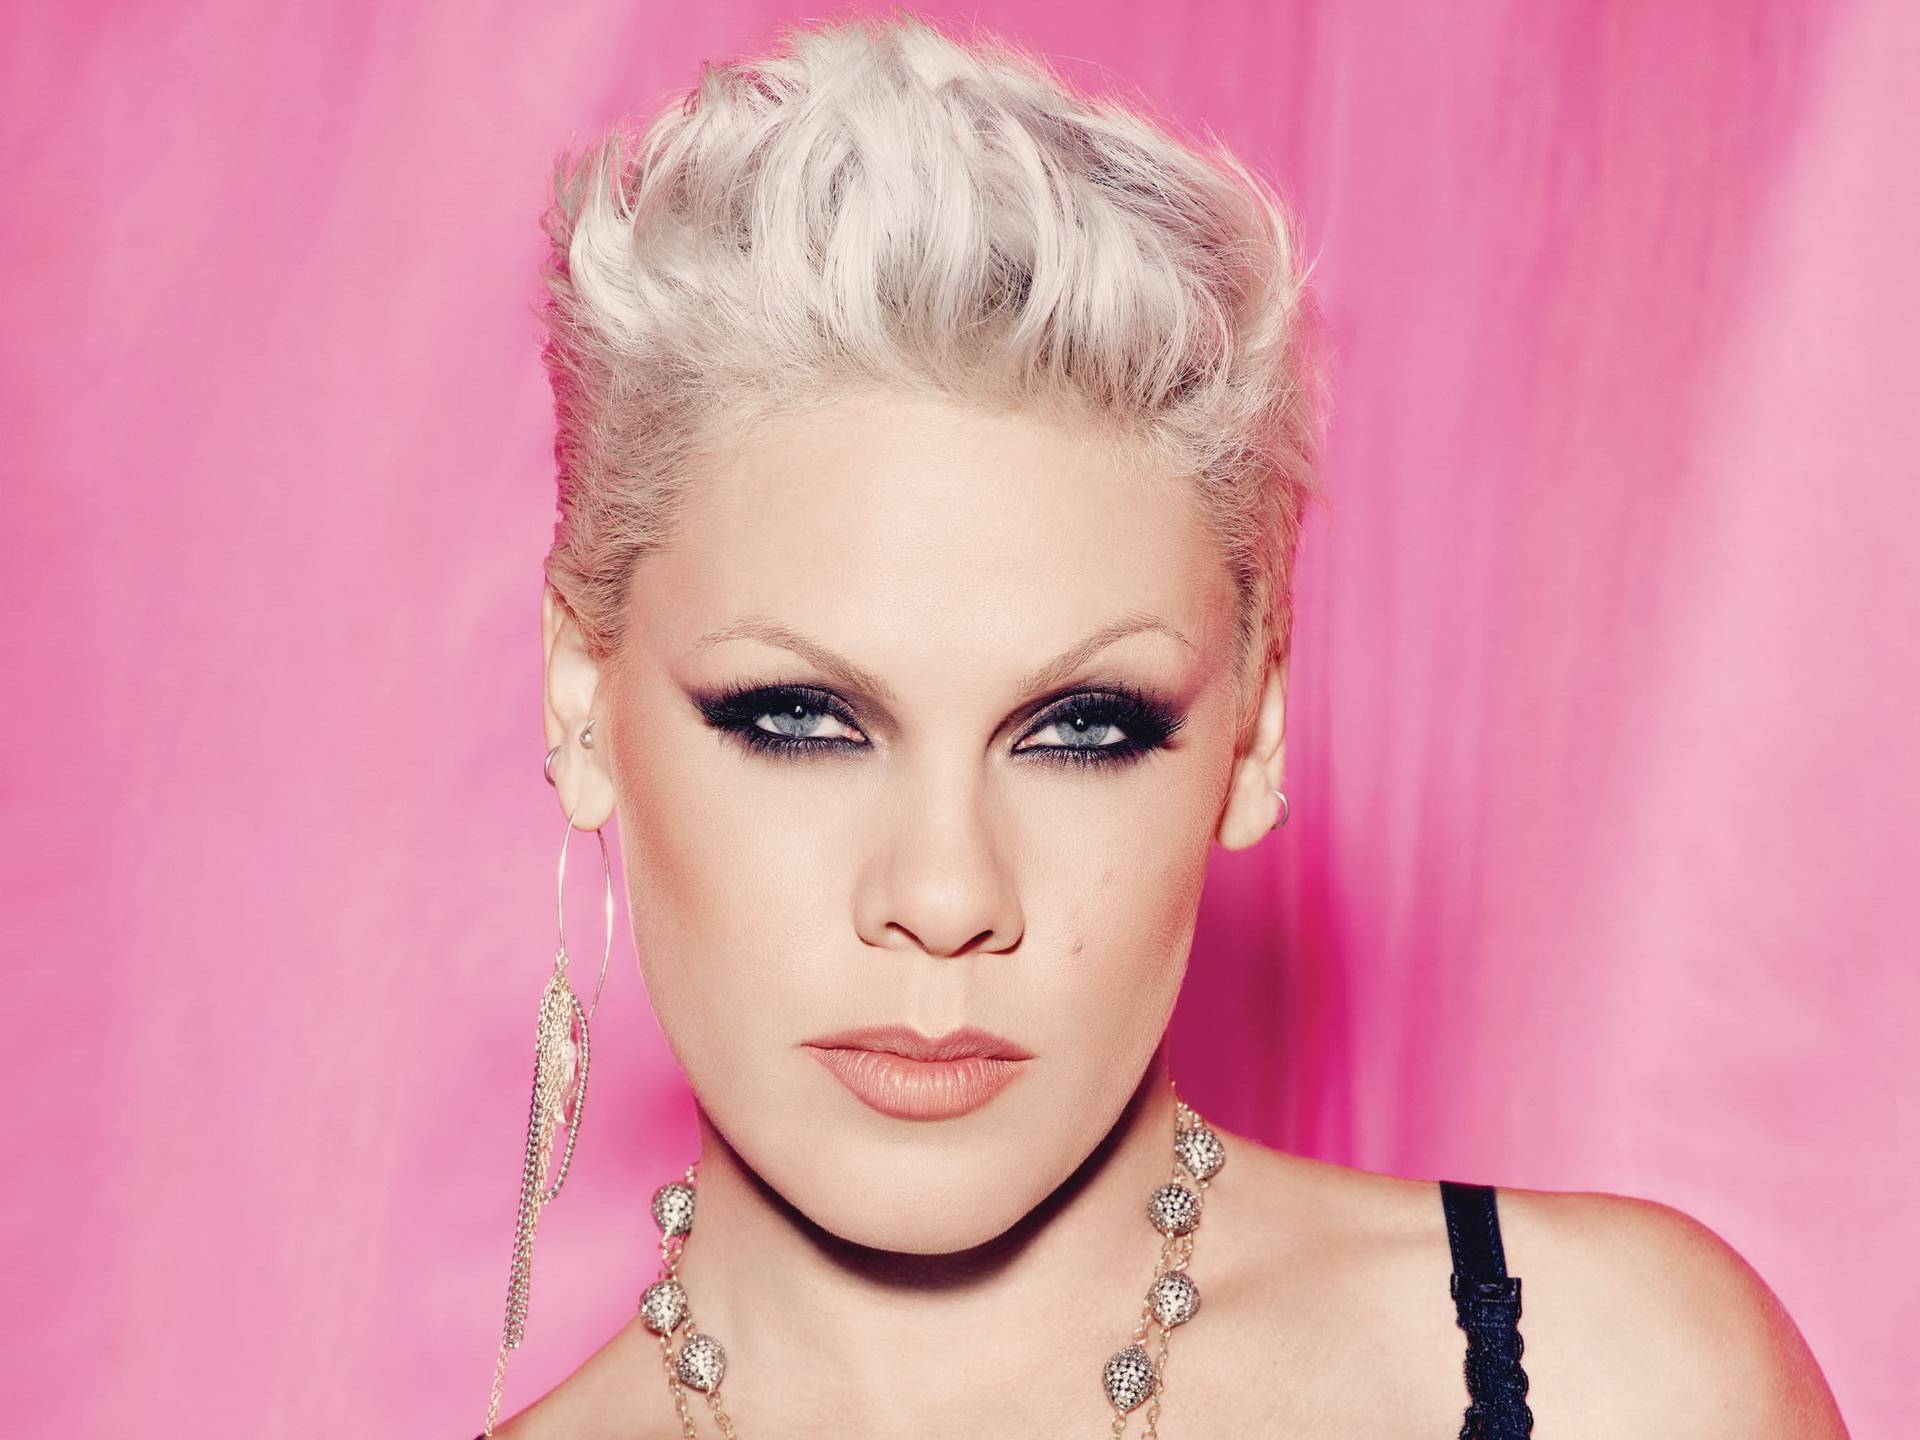 Newsflash.Singer PINK Loves The Show SUITS. Suits Fan Site